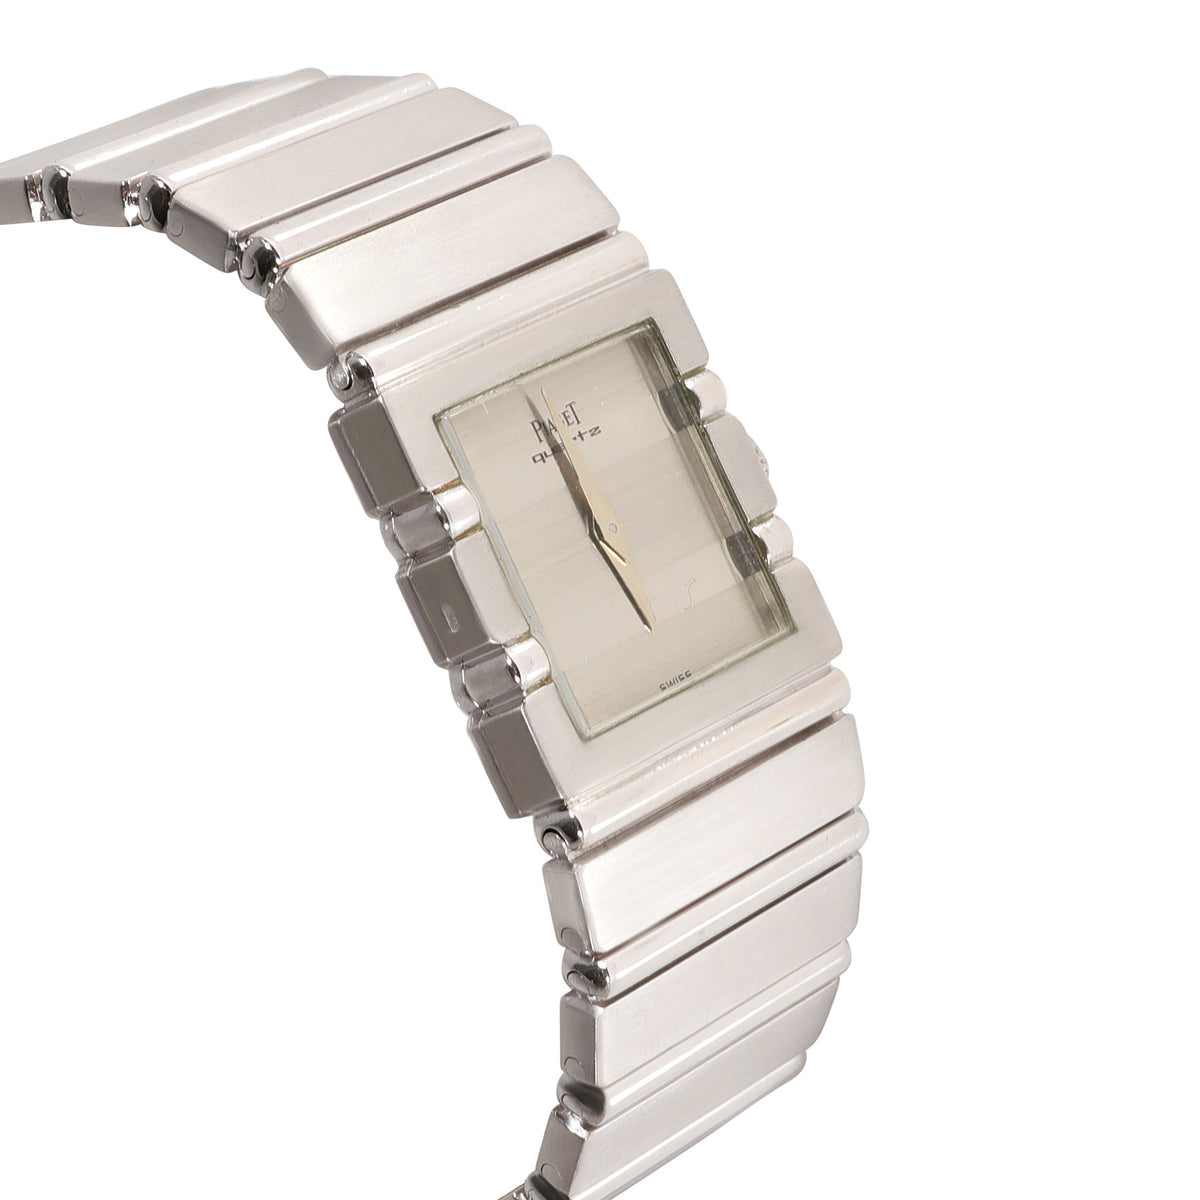 Piaget Polo 8131 G701 Women's Watch in 18kt White Gold